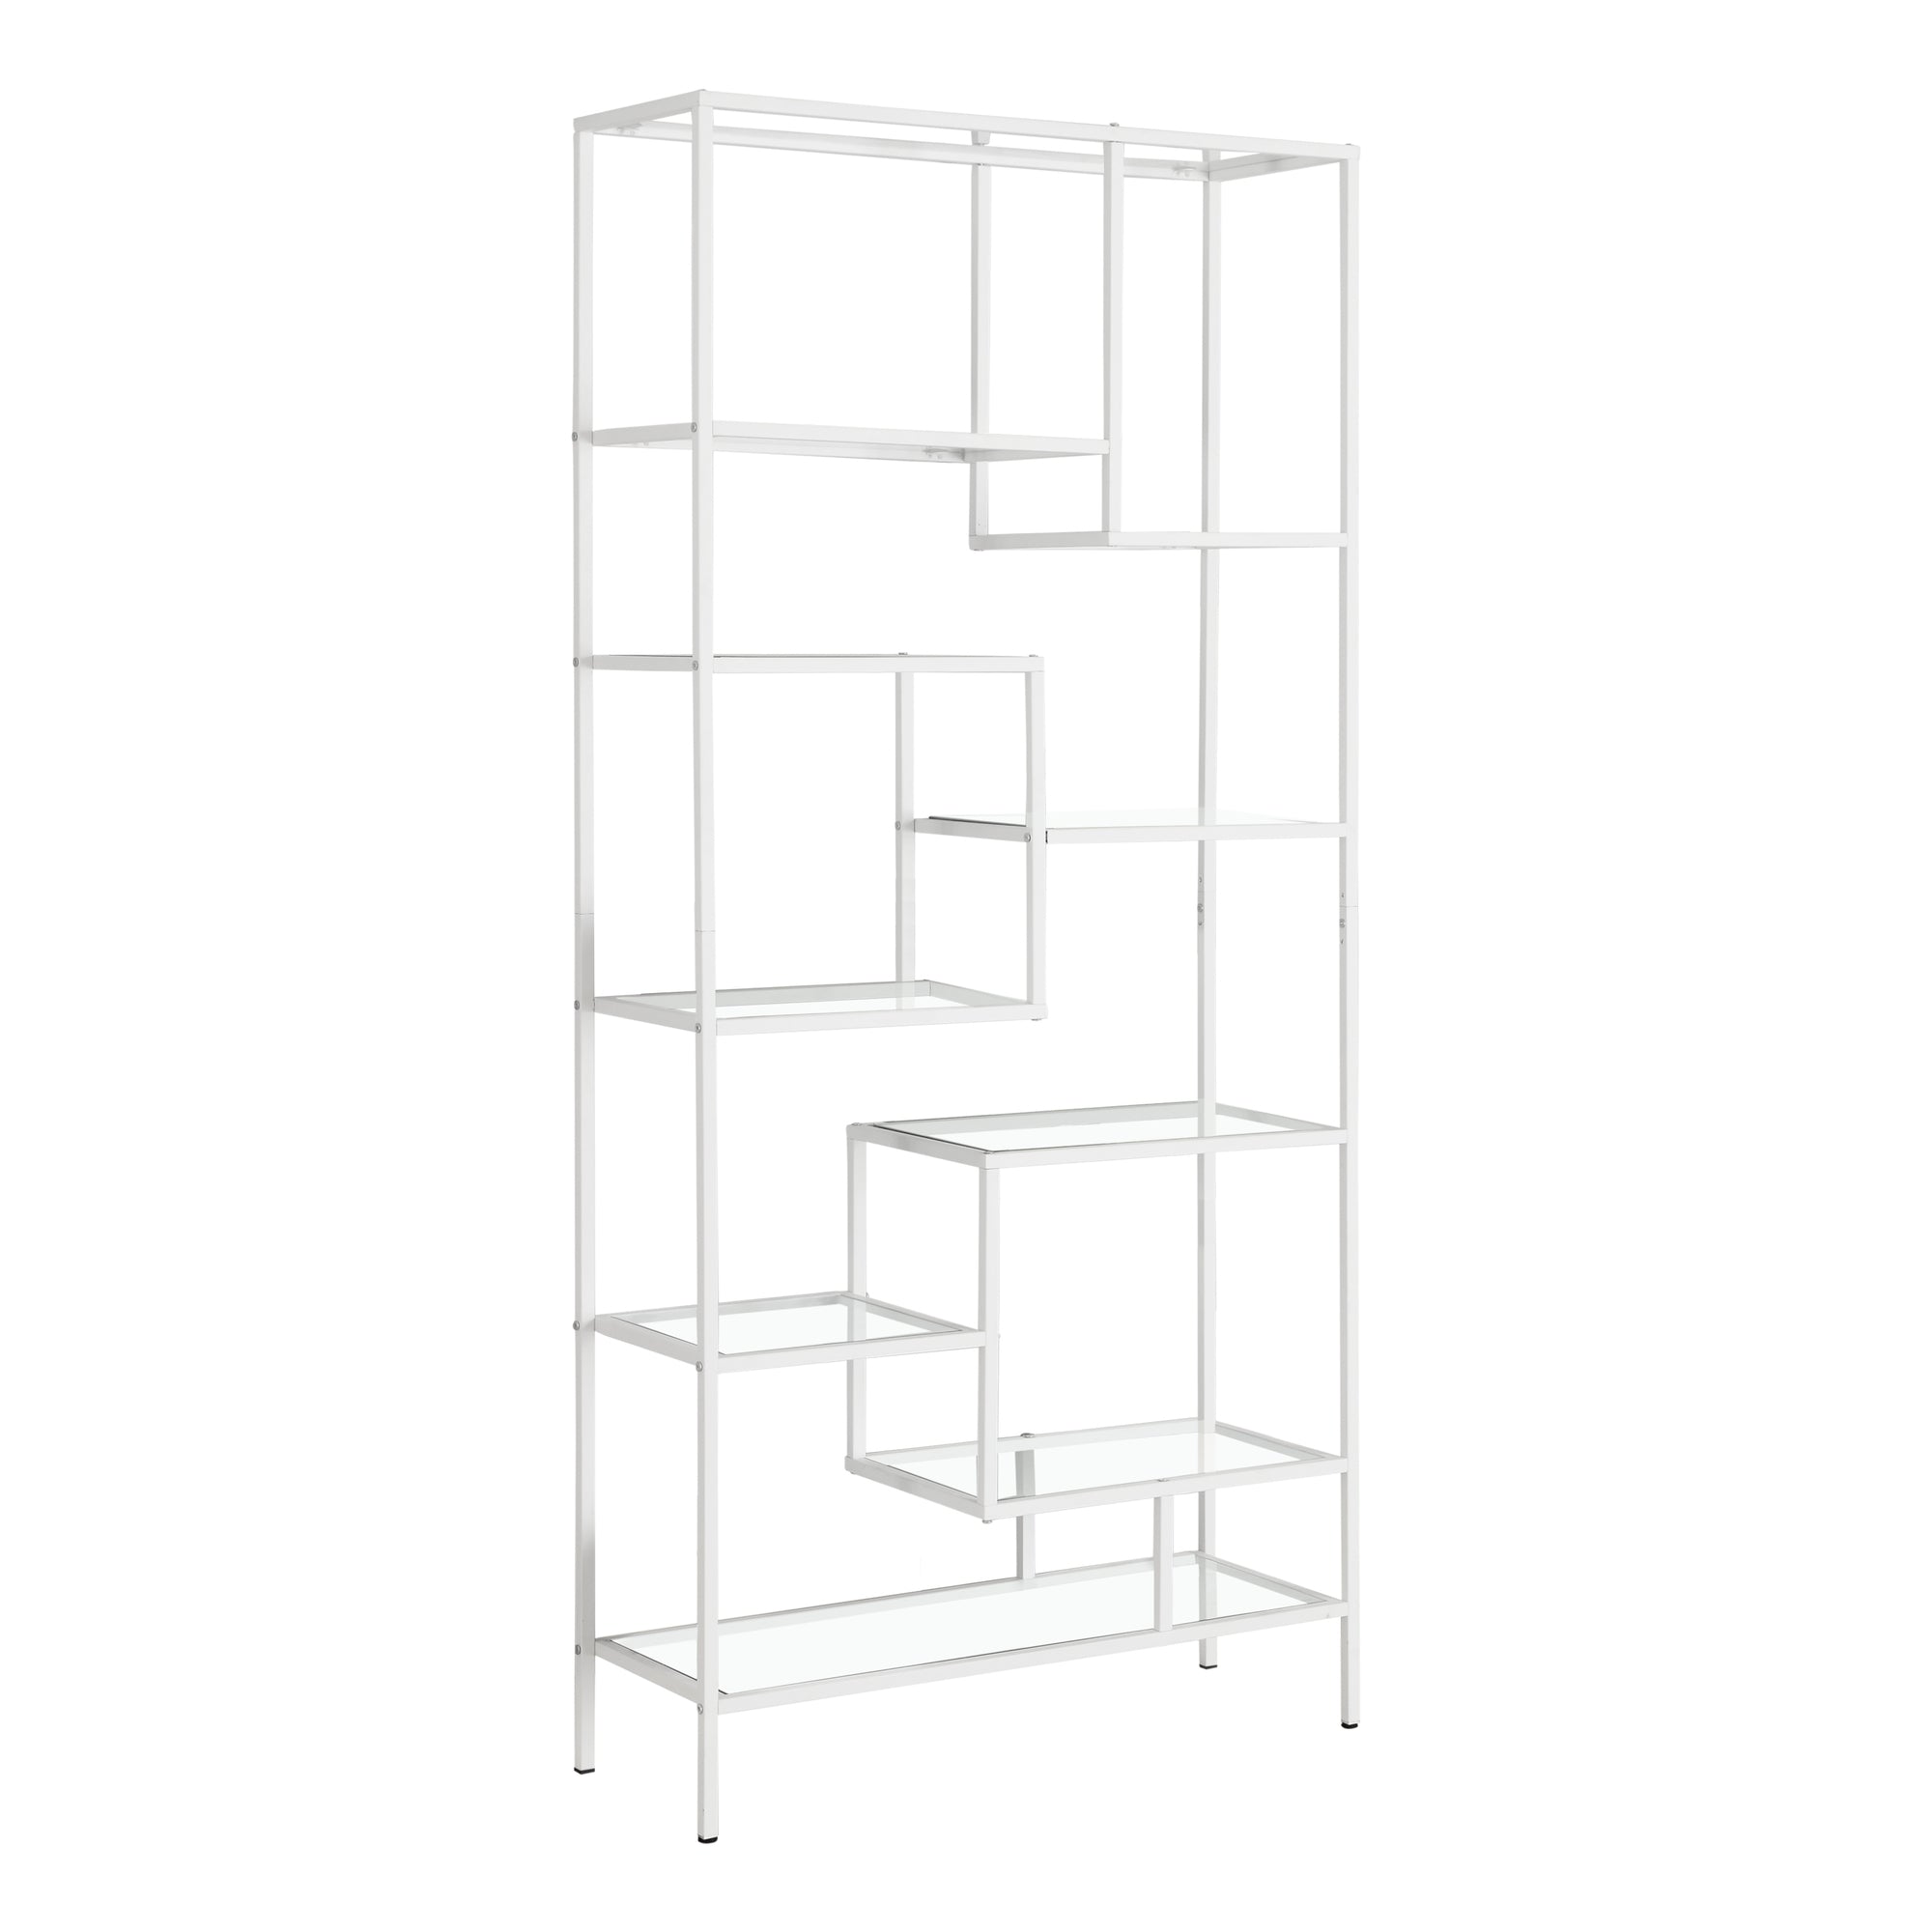 BOOKCASE - 72"H / SILVER METAL WITH TEMPERED GLASS